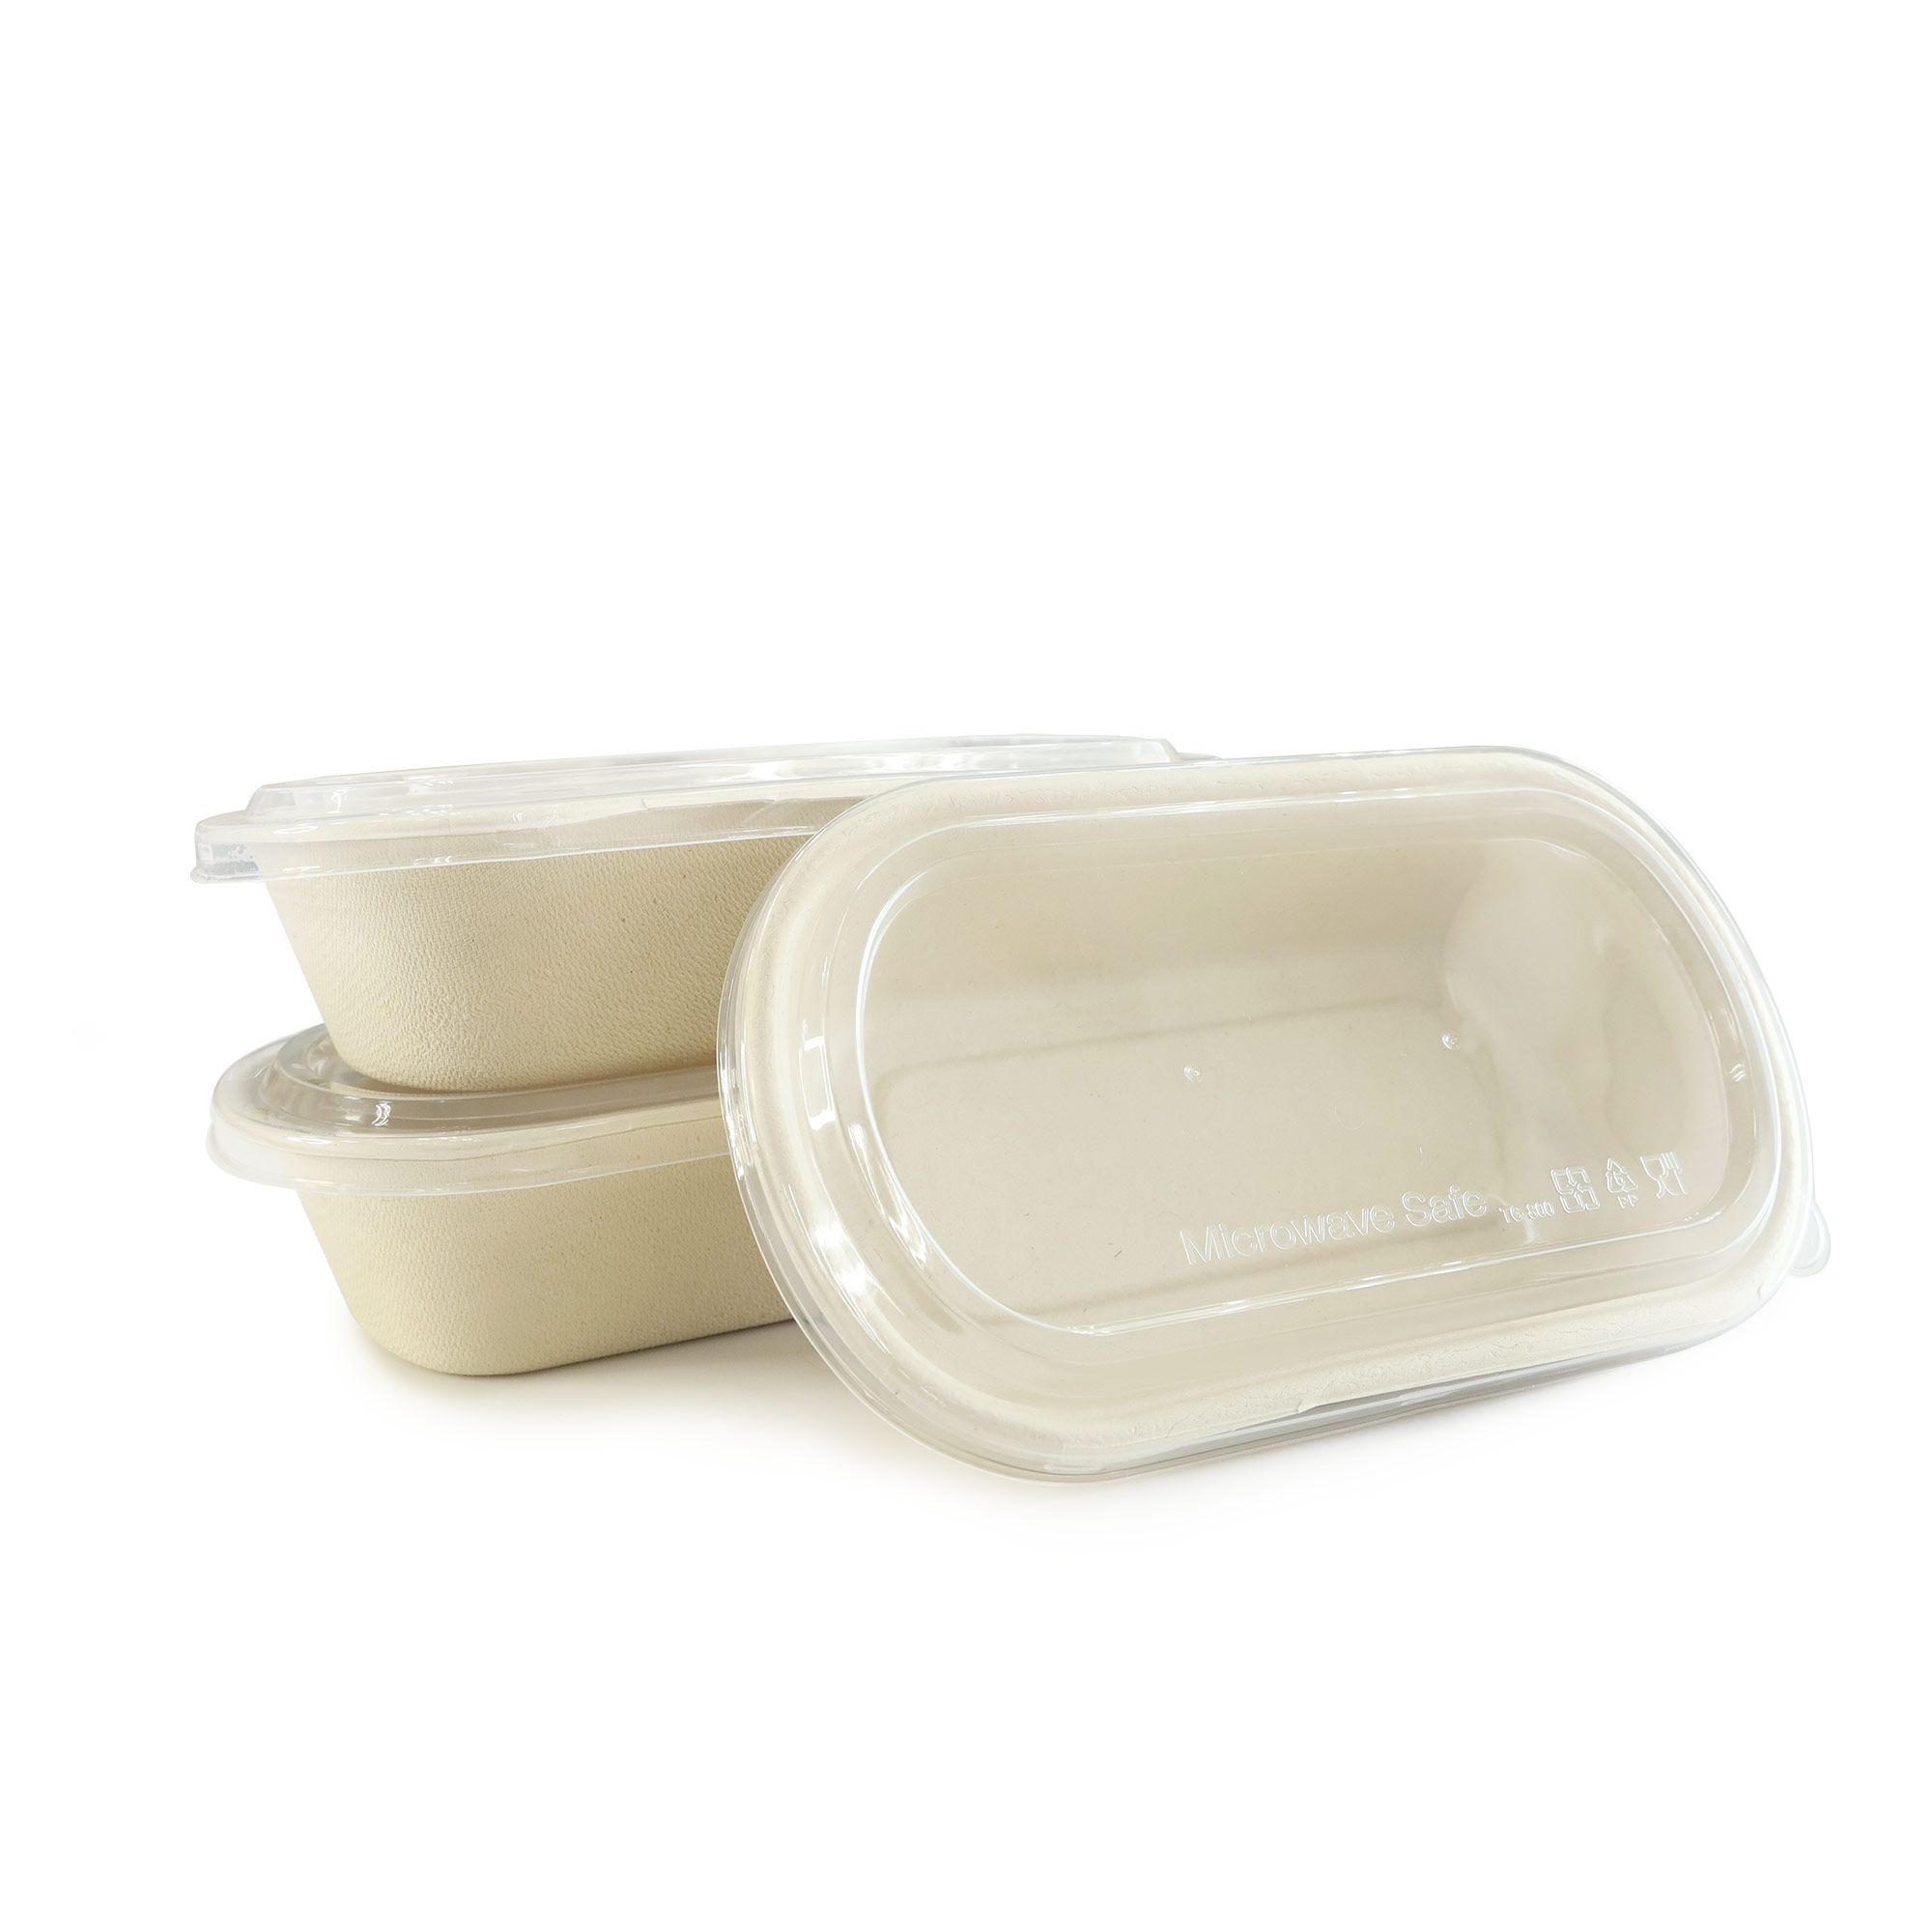 https://cdn.ready-market.com.tw/bac6eec5/Templates/pic/oval-shaped-single-grid-bagasse-lunch-container-with-transparent-lid-1.jpg?v=d2e30111